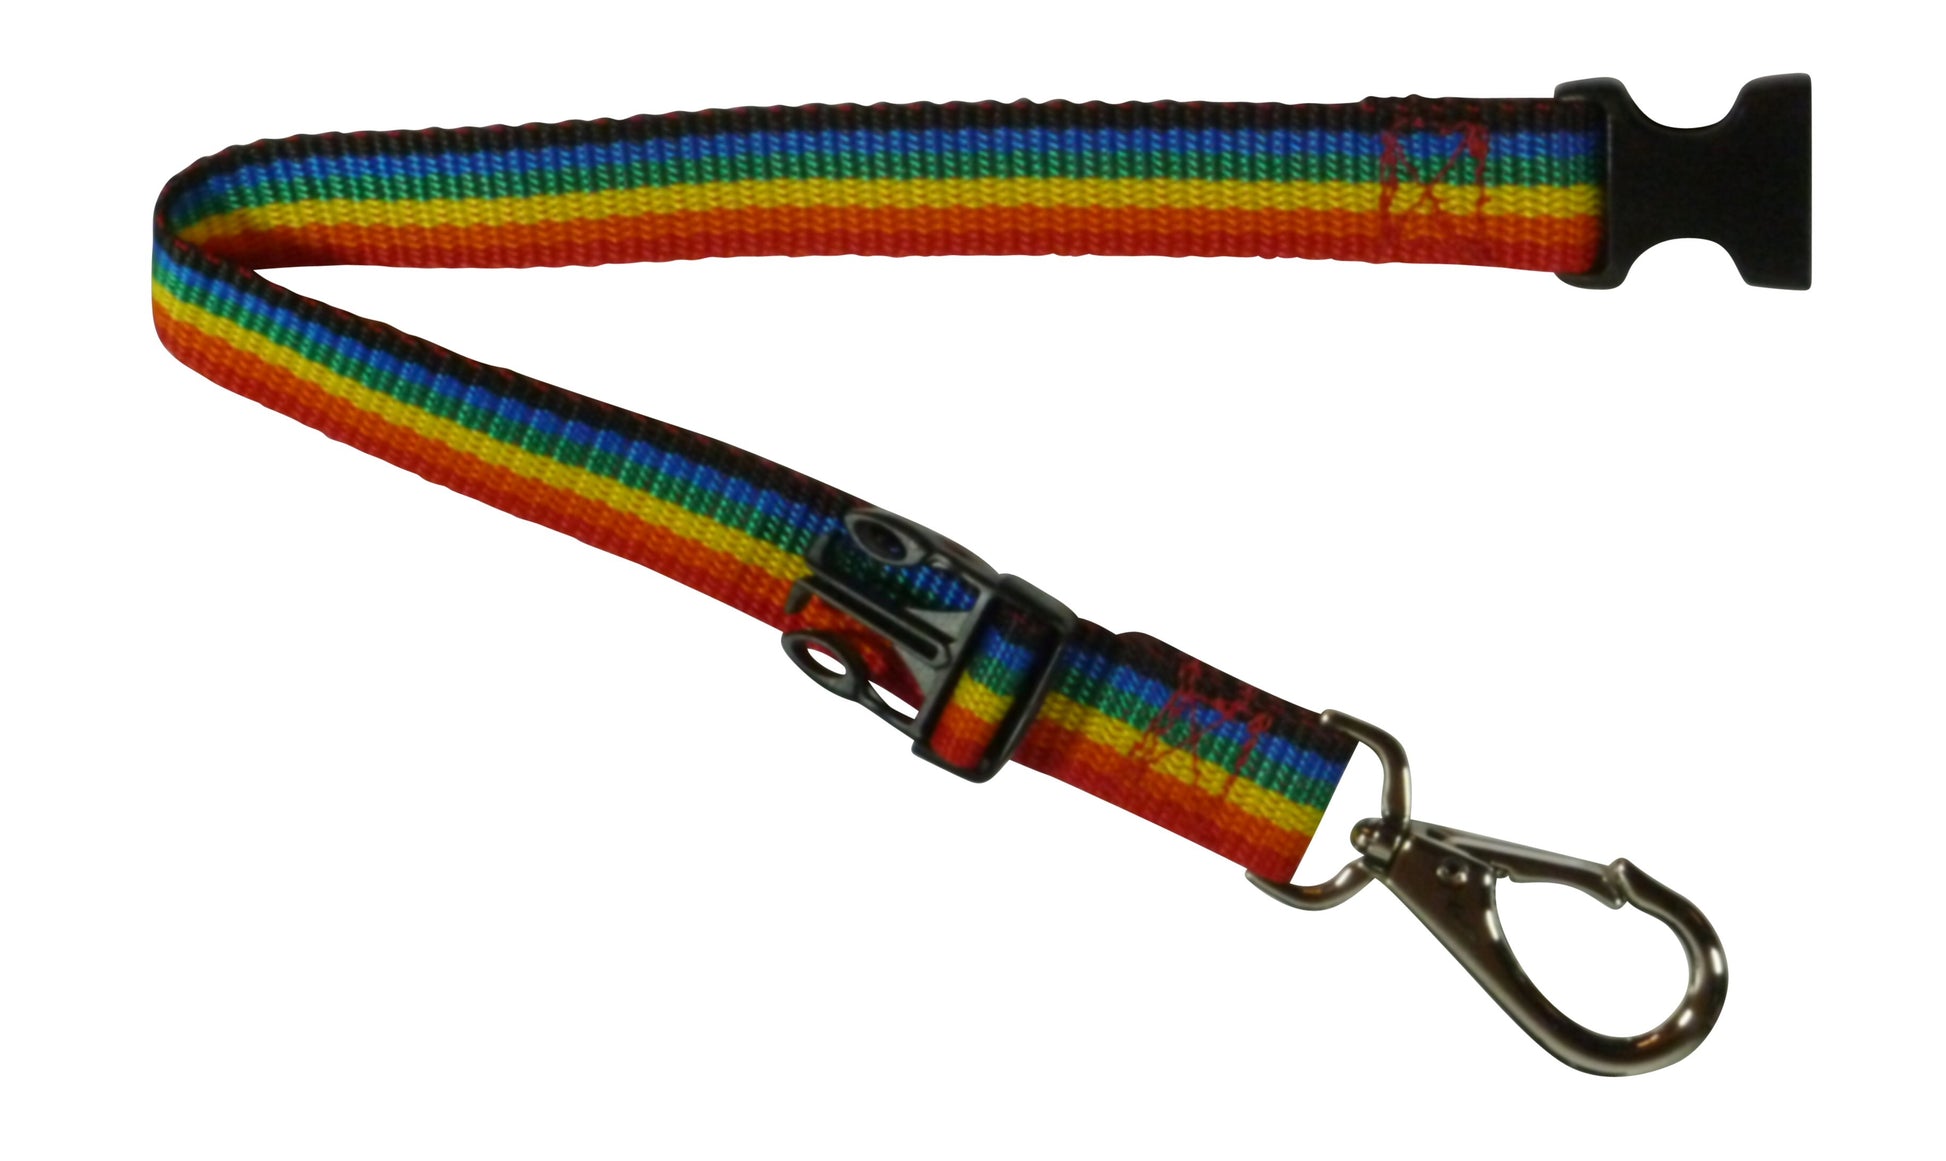 Benristraps Bag Support Strap, Pack of 2 Straps in rainbow